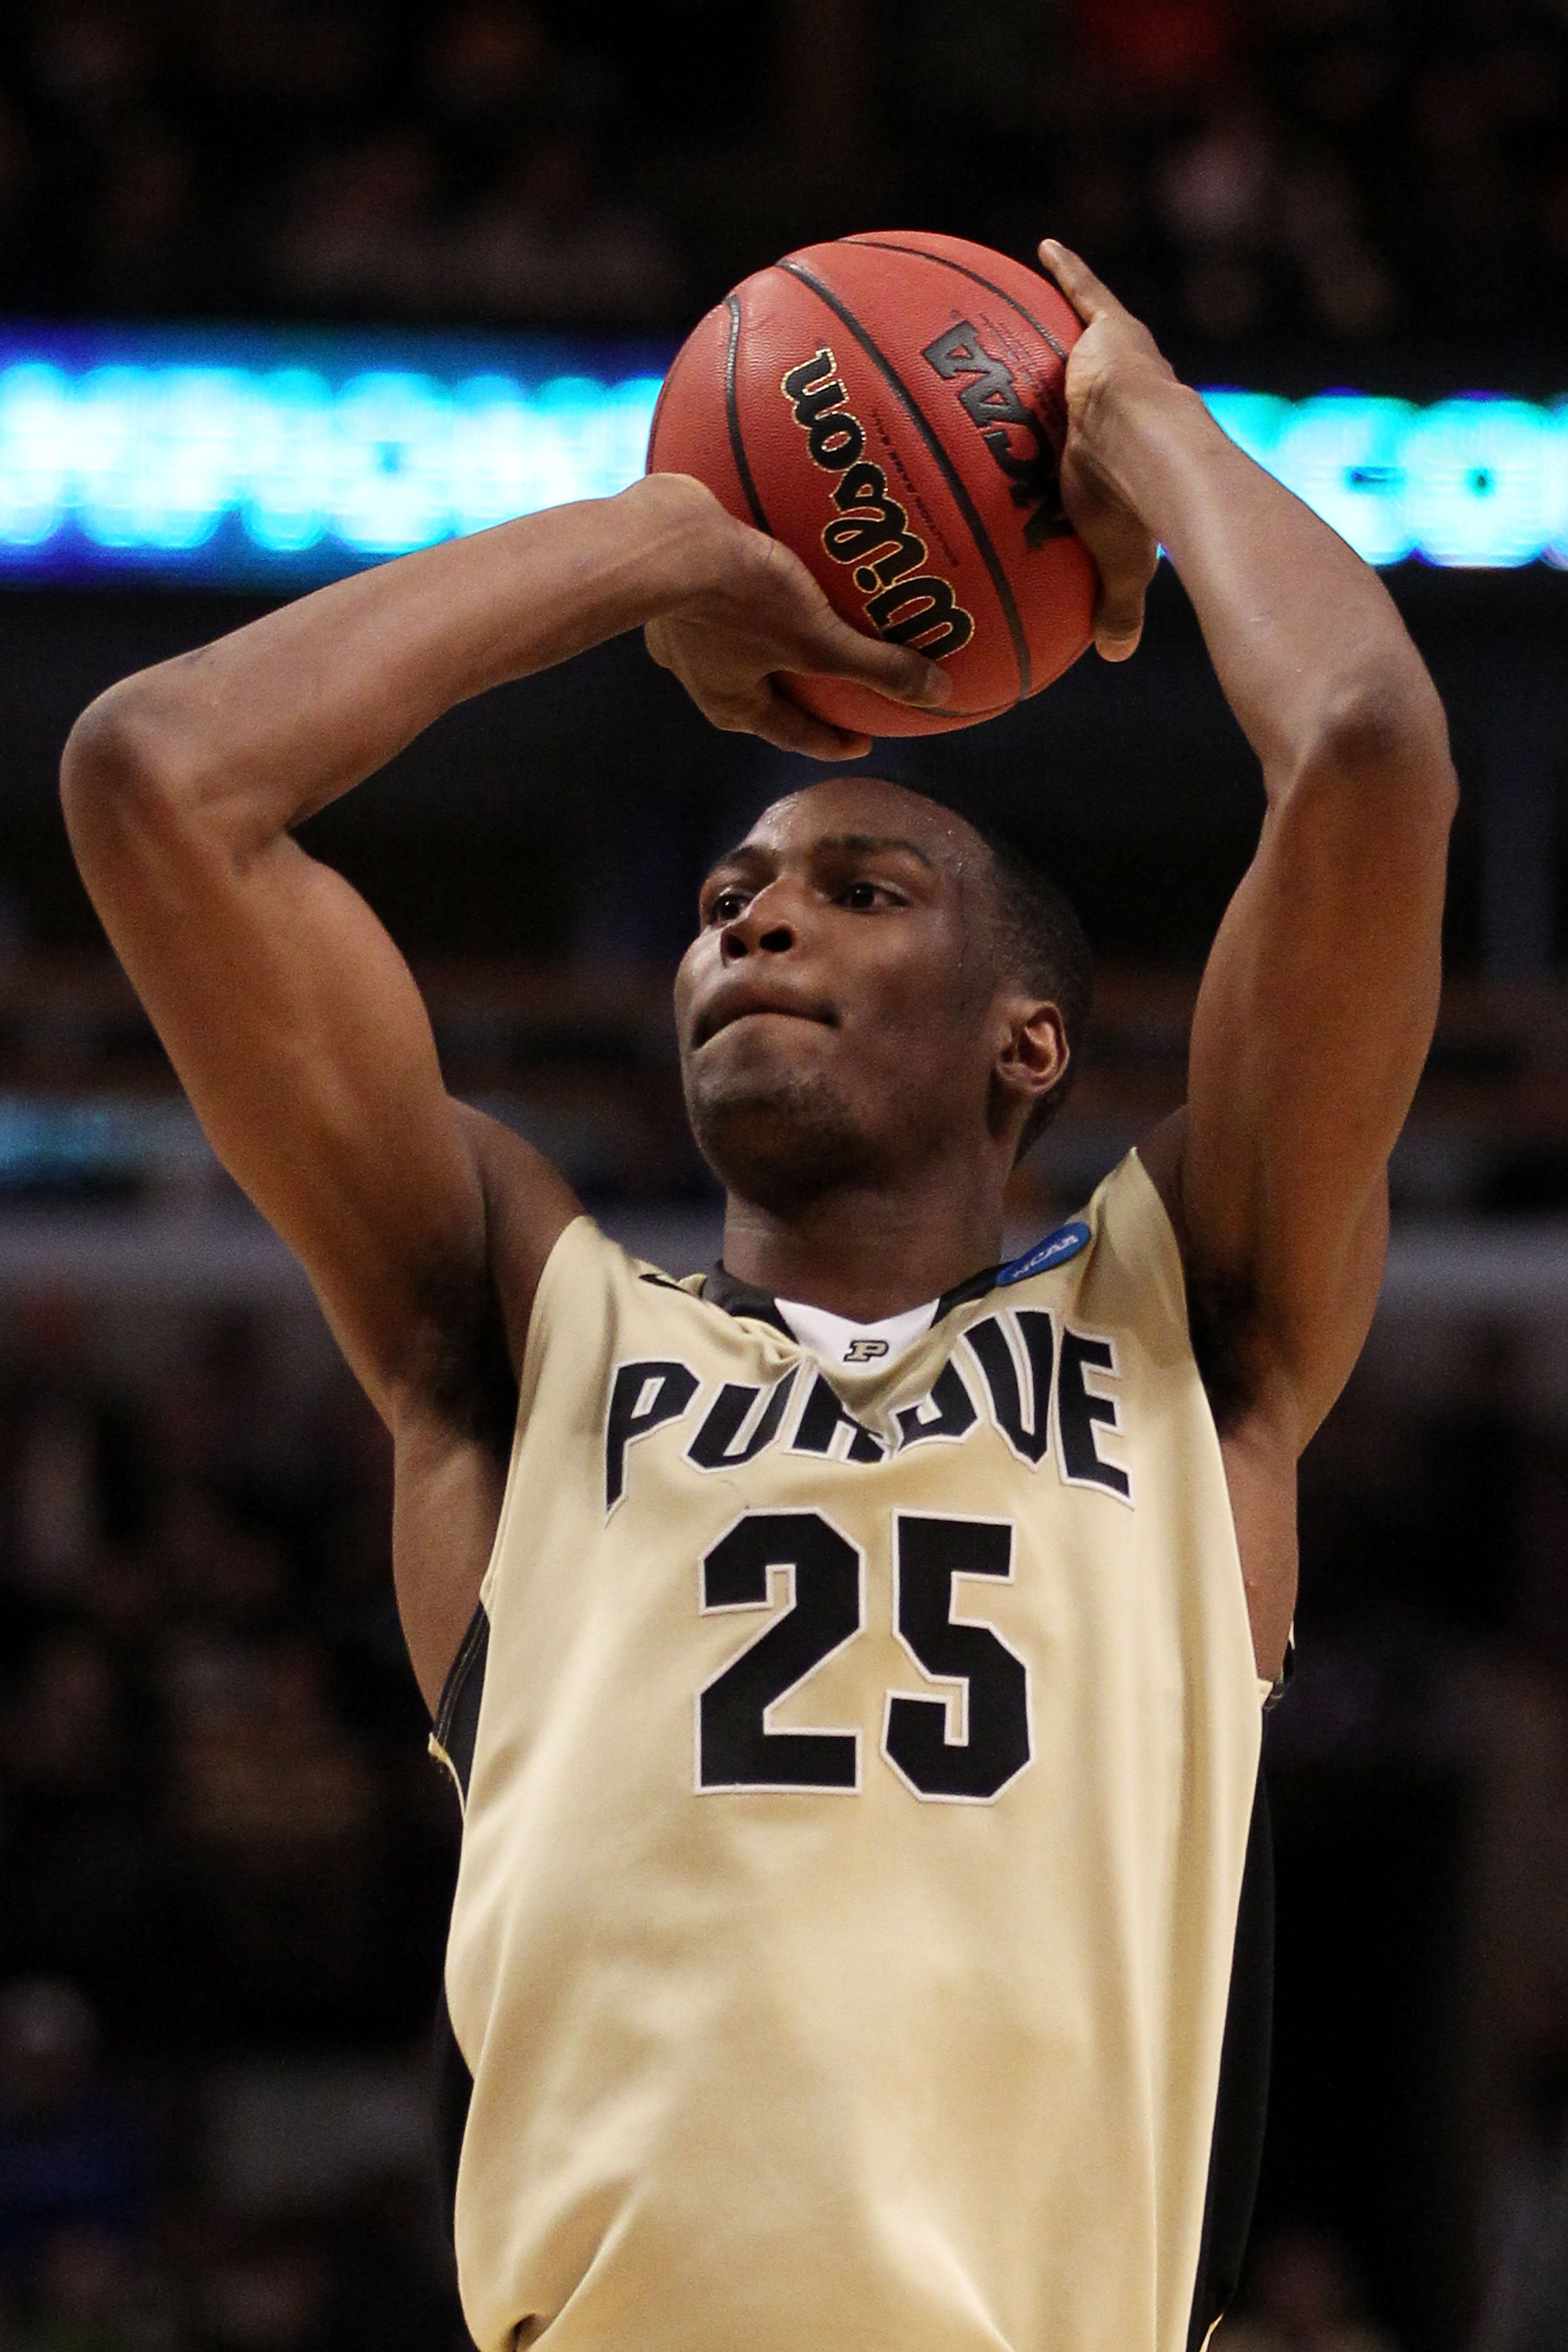 CHICAGO, IL - MARCH 20: JaJuan Johnson #25 of the Purdue Boilermakers shoots against the Virginia Commonwealth Rams in the first half during the third round of the 2011 NCAA men's basketball tournament at the United Center on March 20, 2011 in Chicago, Il